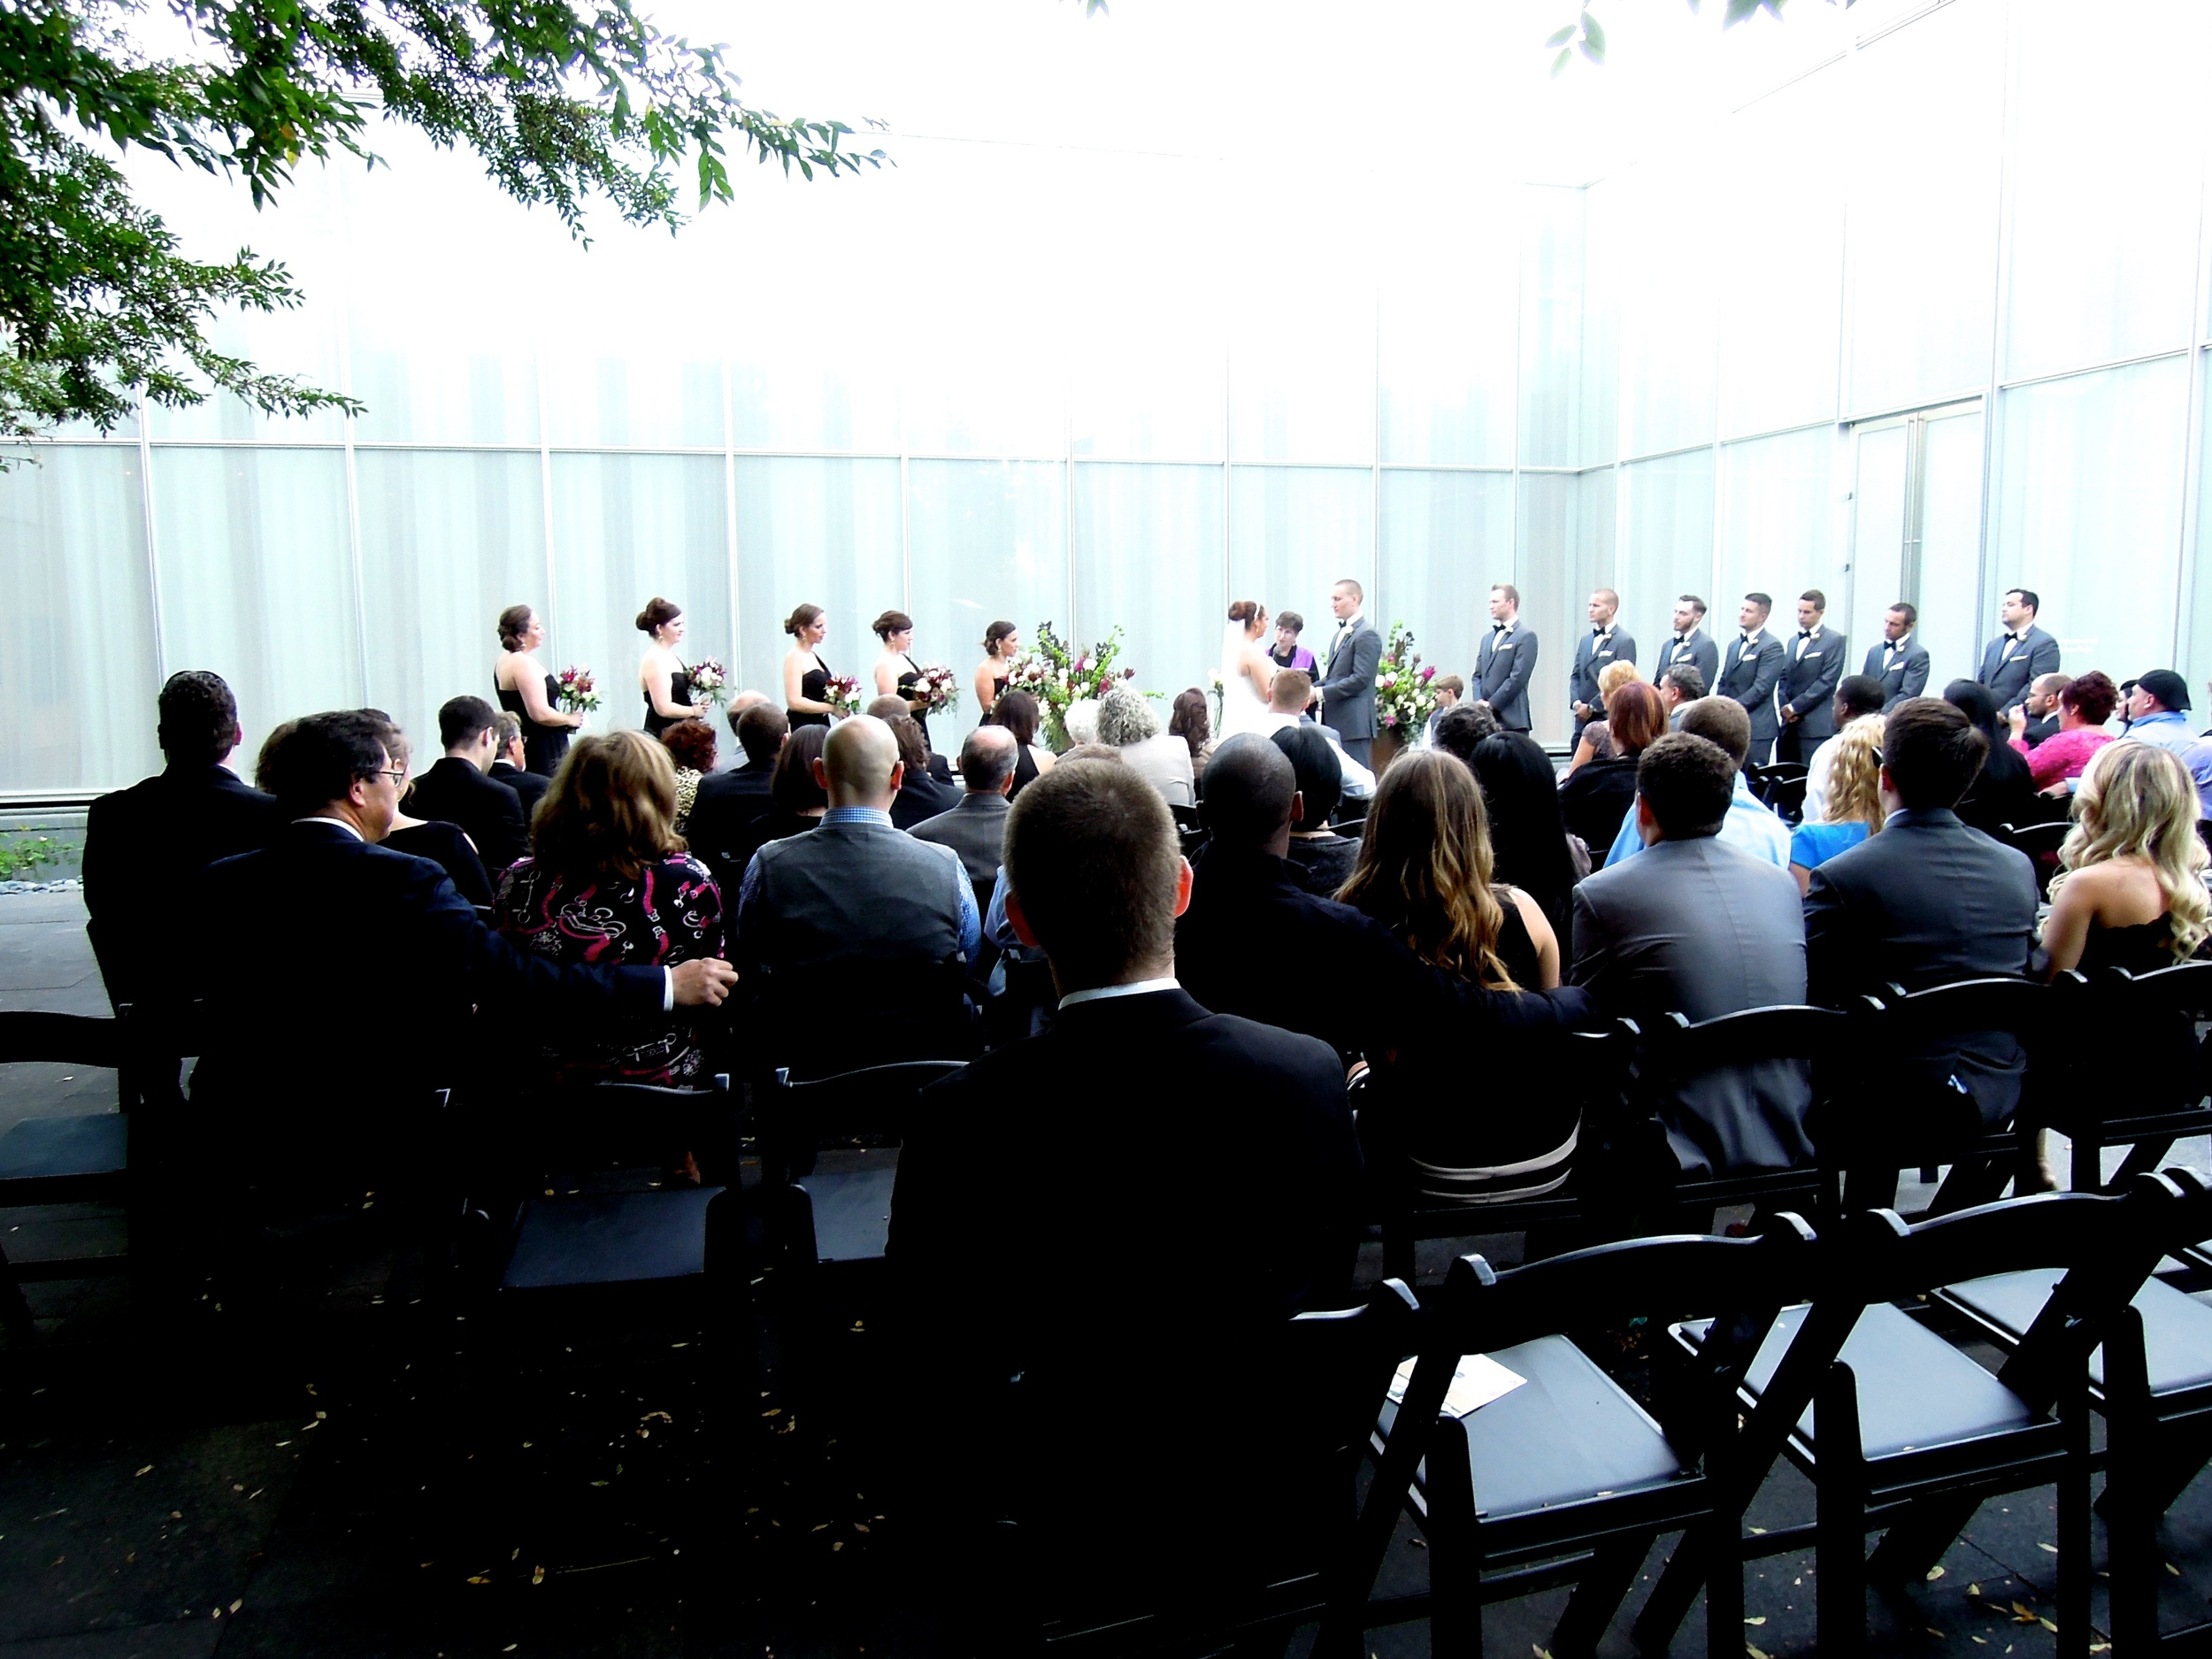  Stunning wedding at The North Carolina Museum of Art in Raleigh 